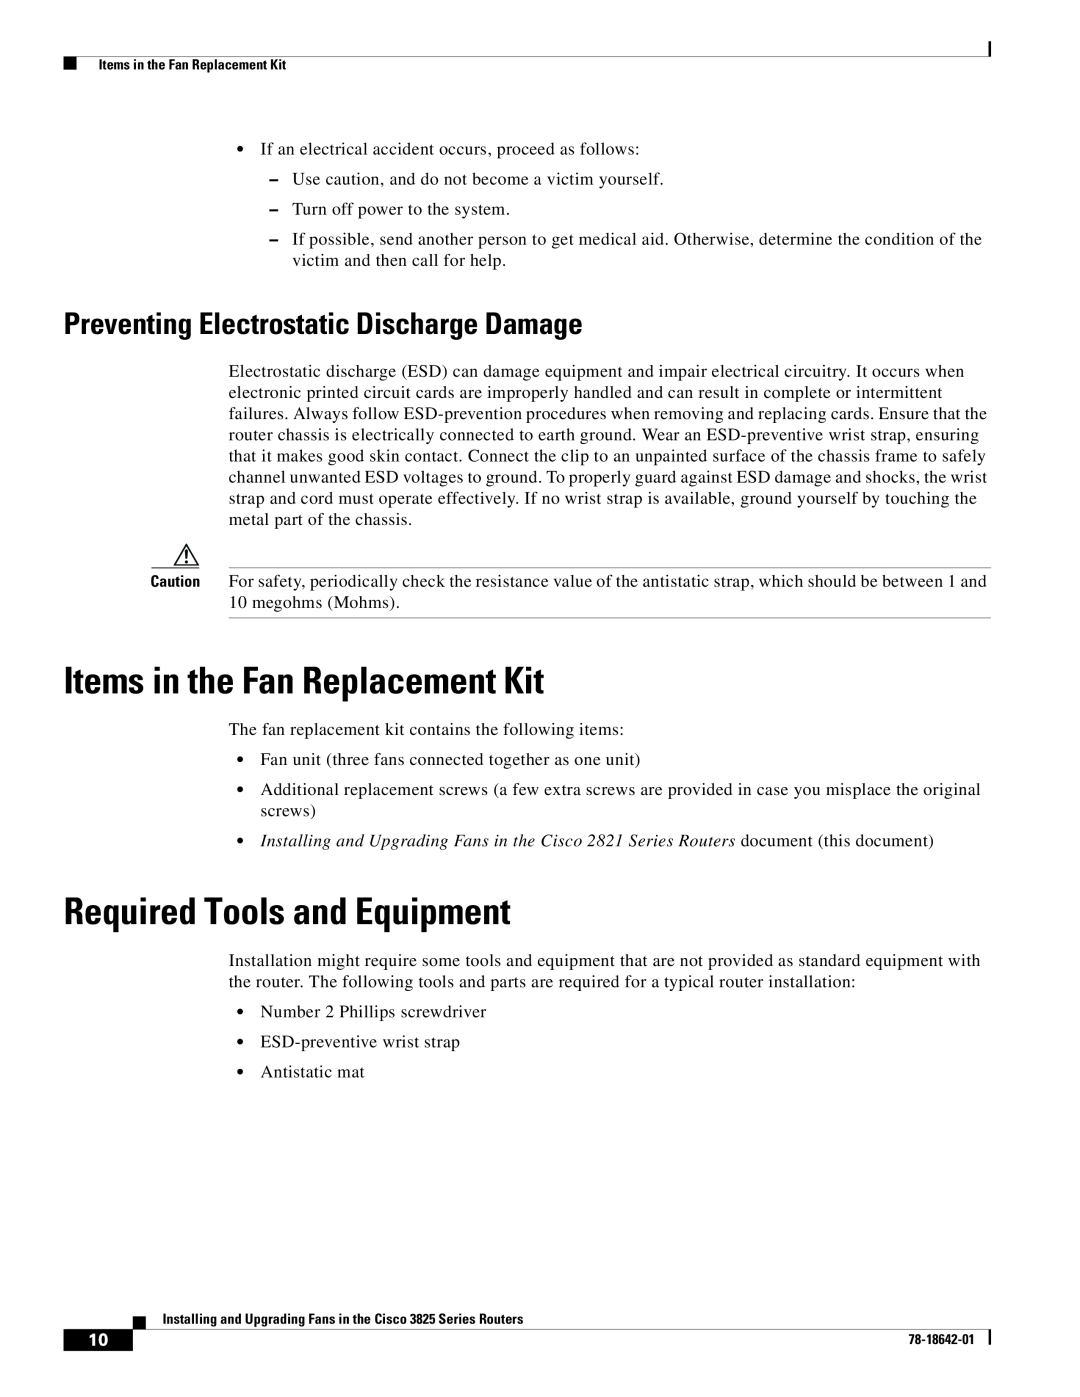 Cisco Systems 3825 Series manual Items in the Fan Replacement Kit, Required Tools and Equipment 